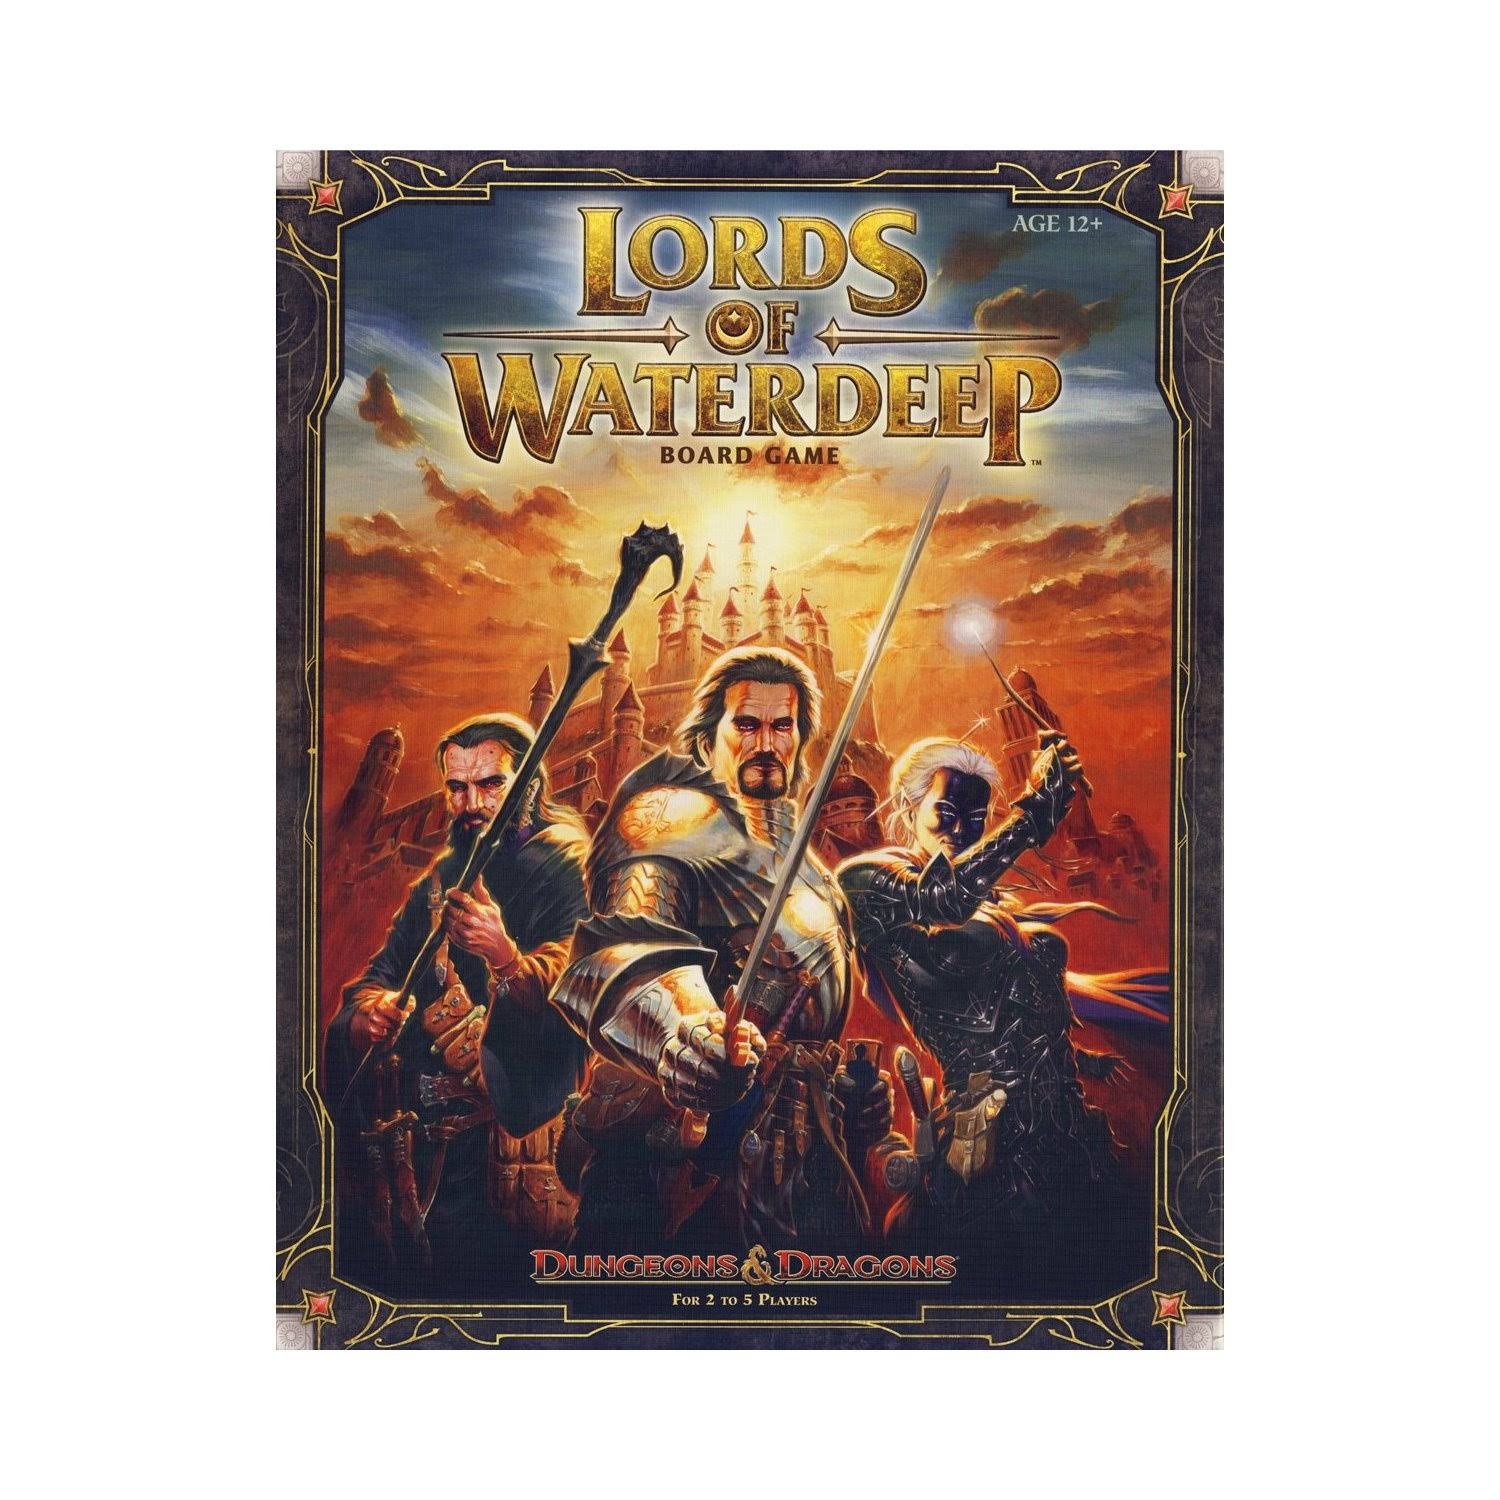 Lords of Waterdeep: A Dungeons and Dragons Board Game